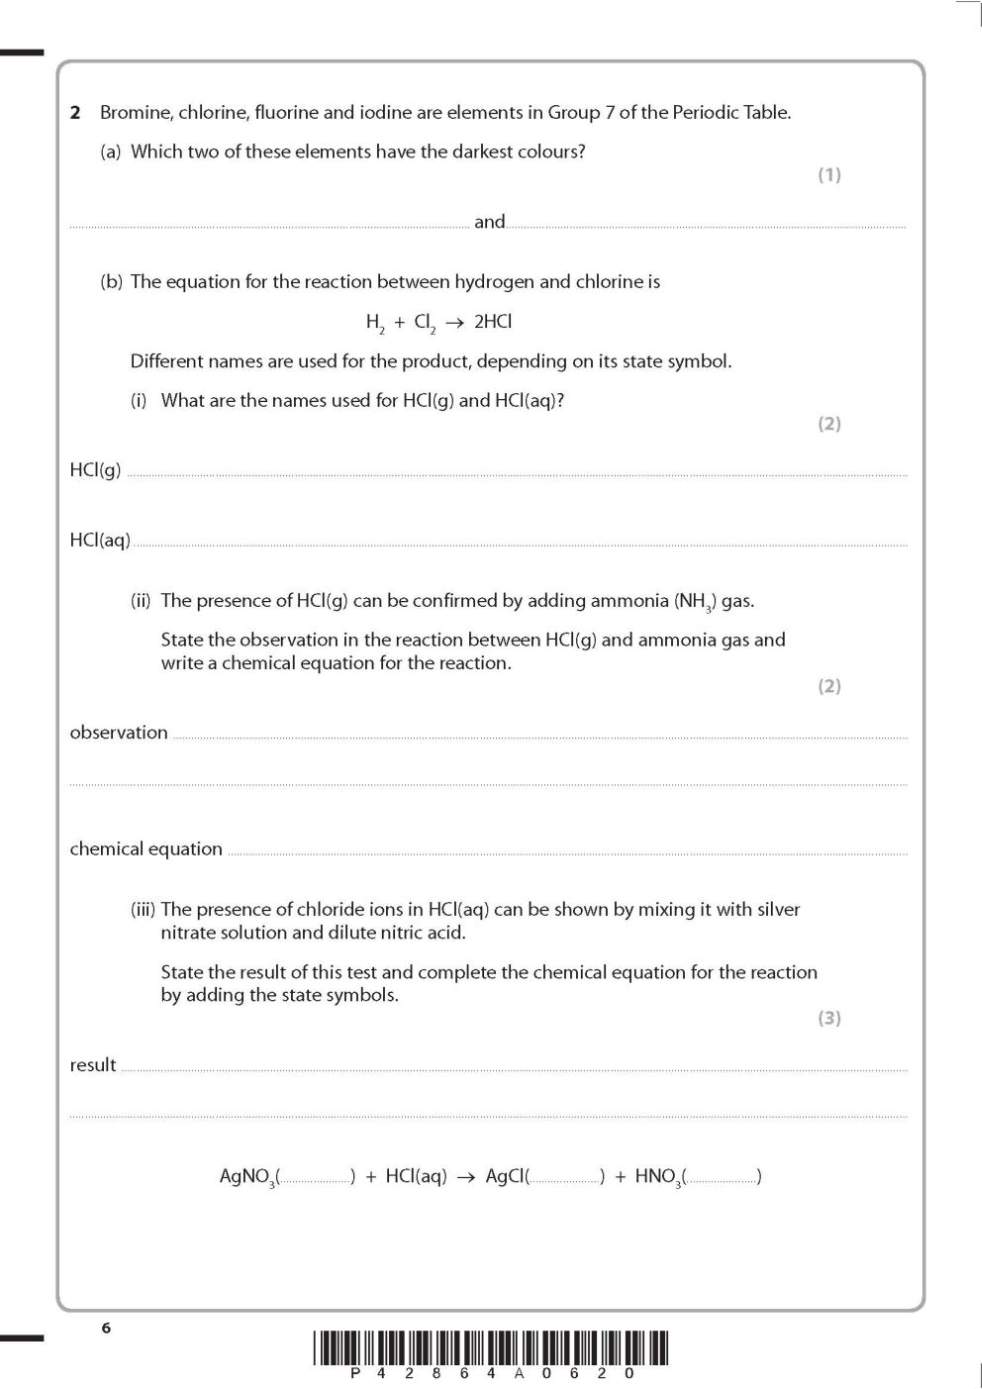 marathi-comprehension-passages-with-questions-and-answers-pdf-worksheet